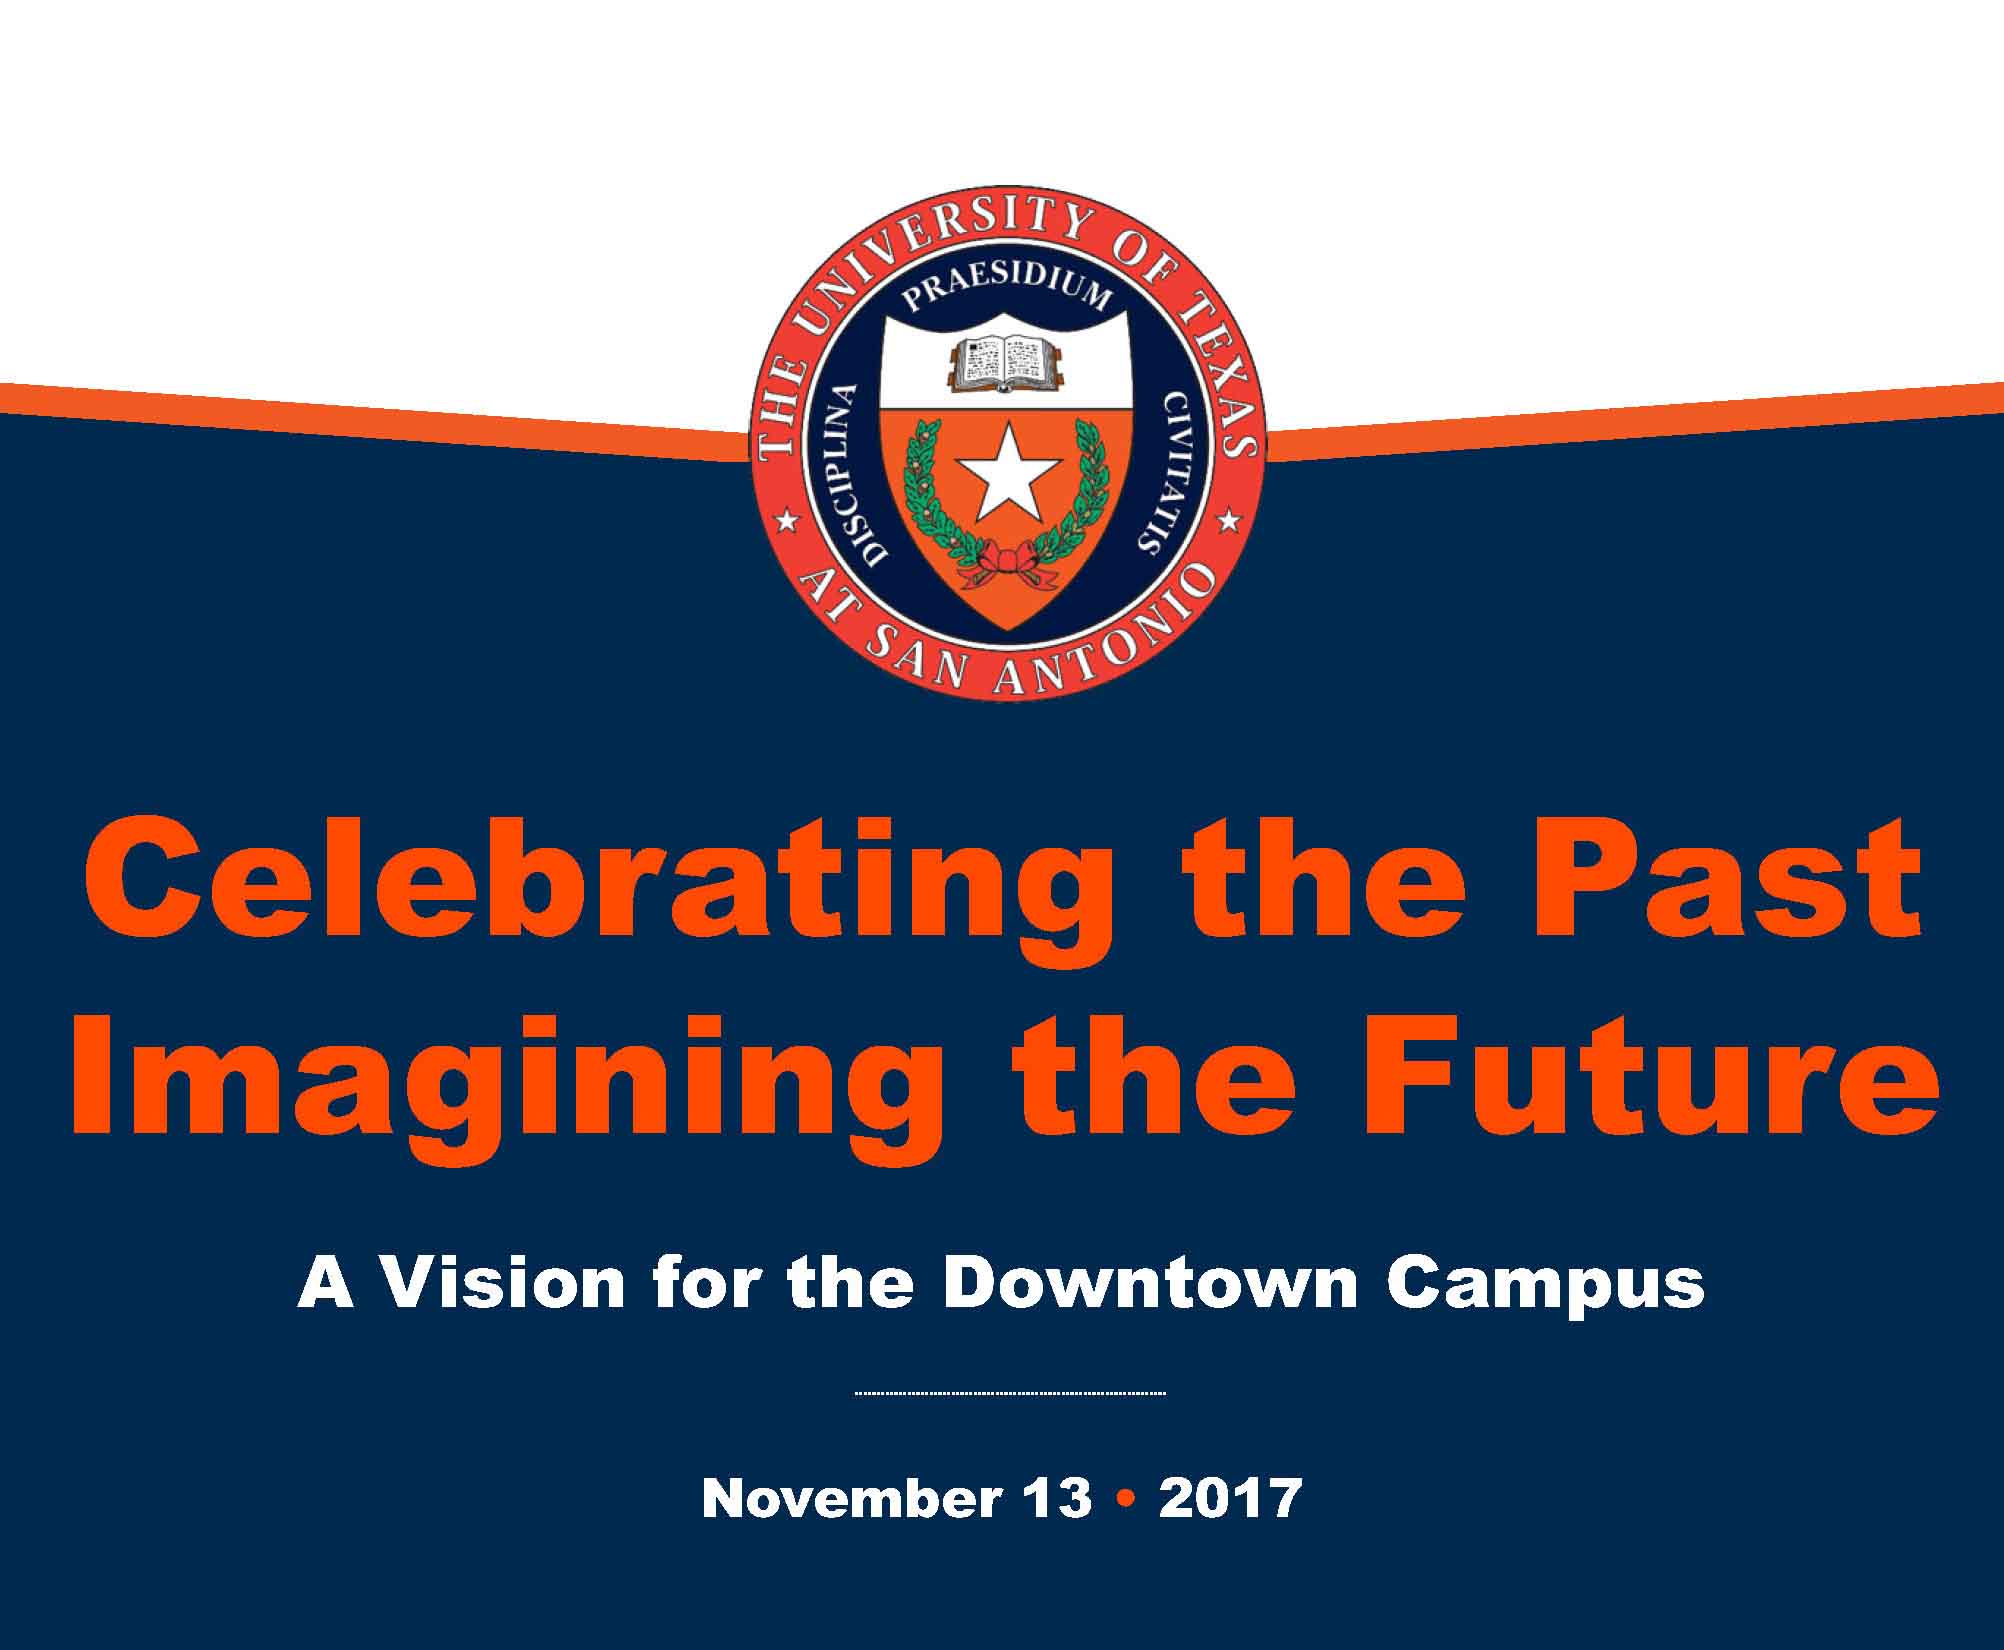 A Vision for the Downtown Campus